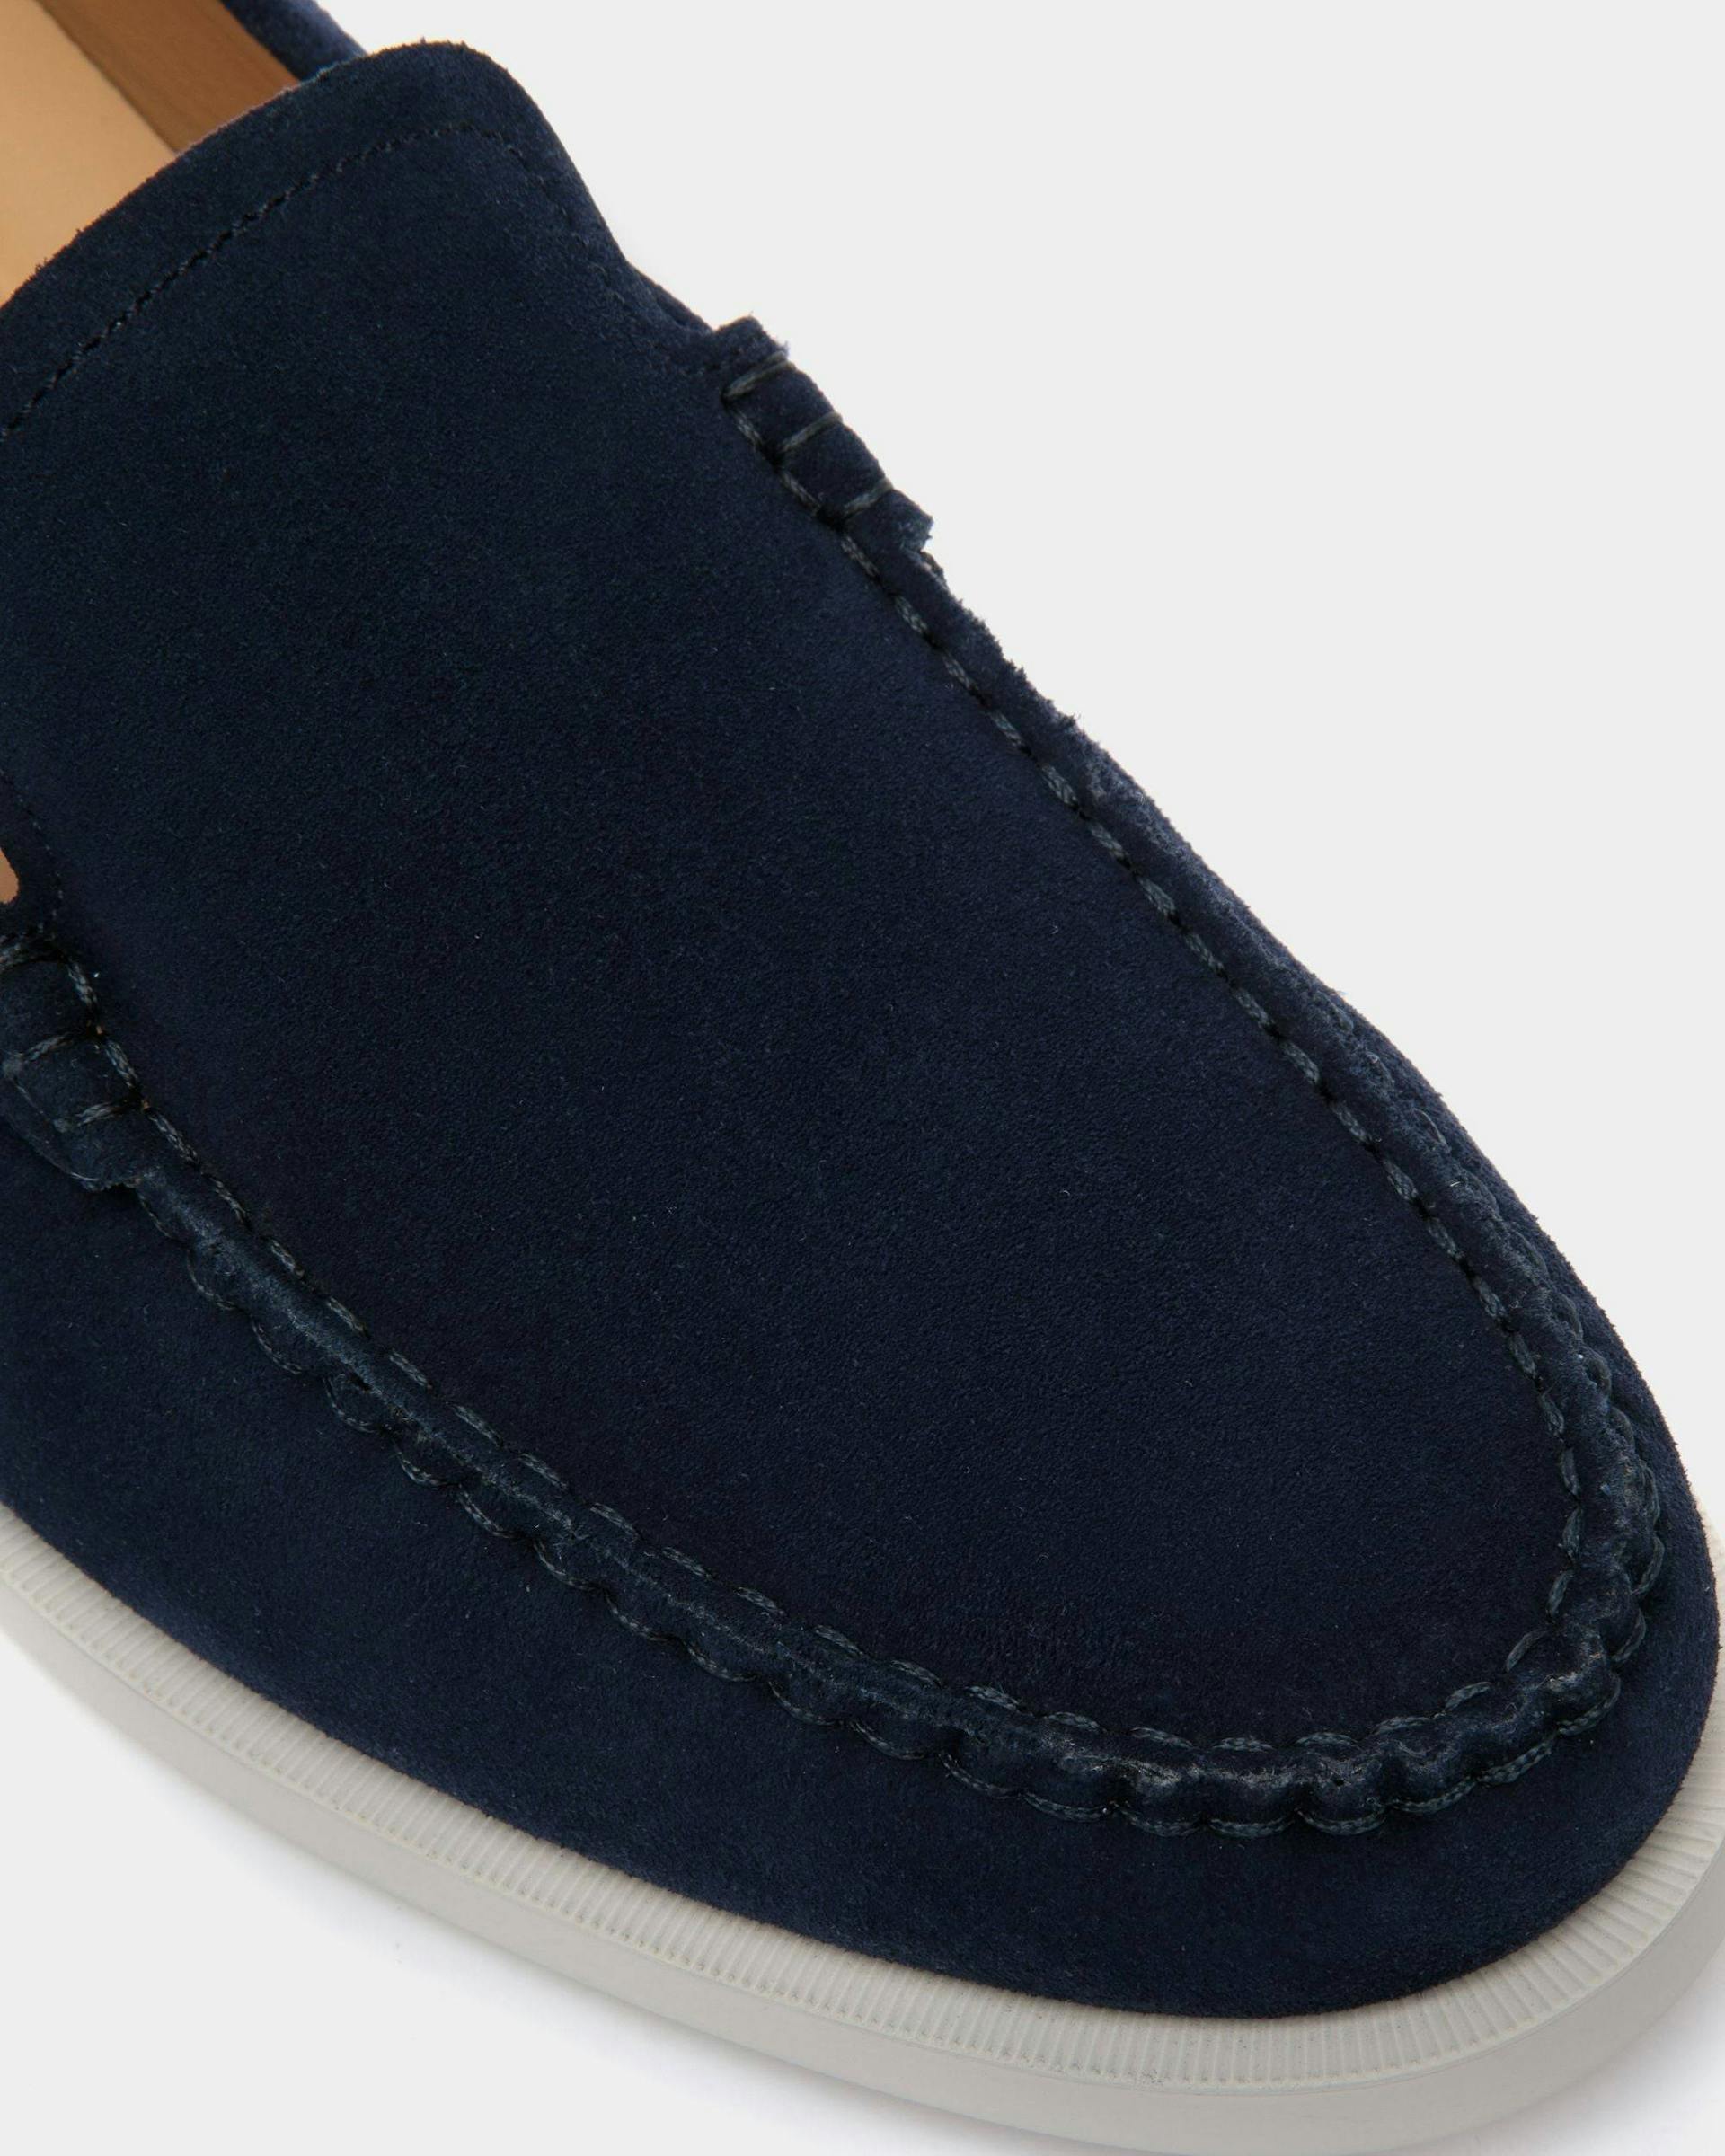 Men's Nelson Loafer in Suede | Bally | Still Life Detail